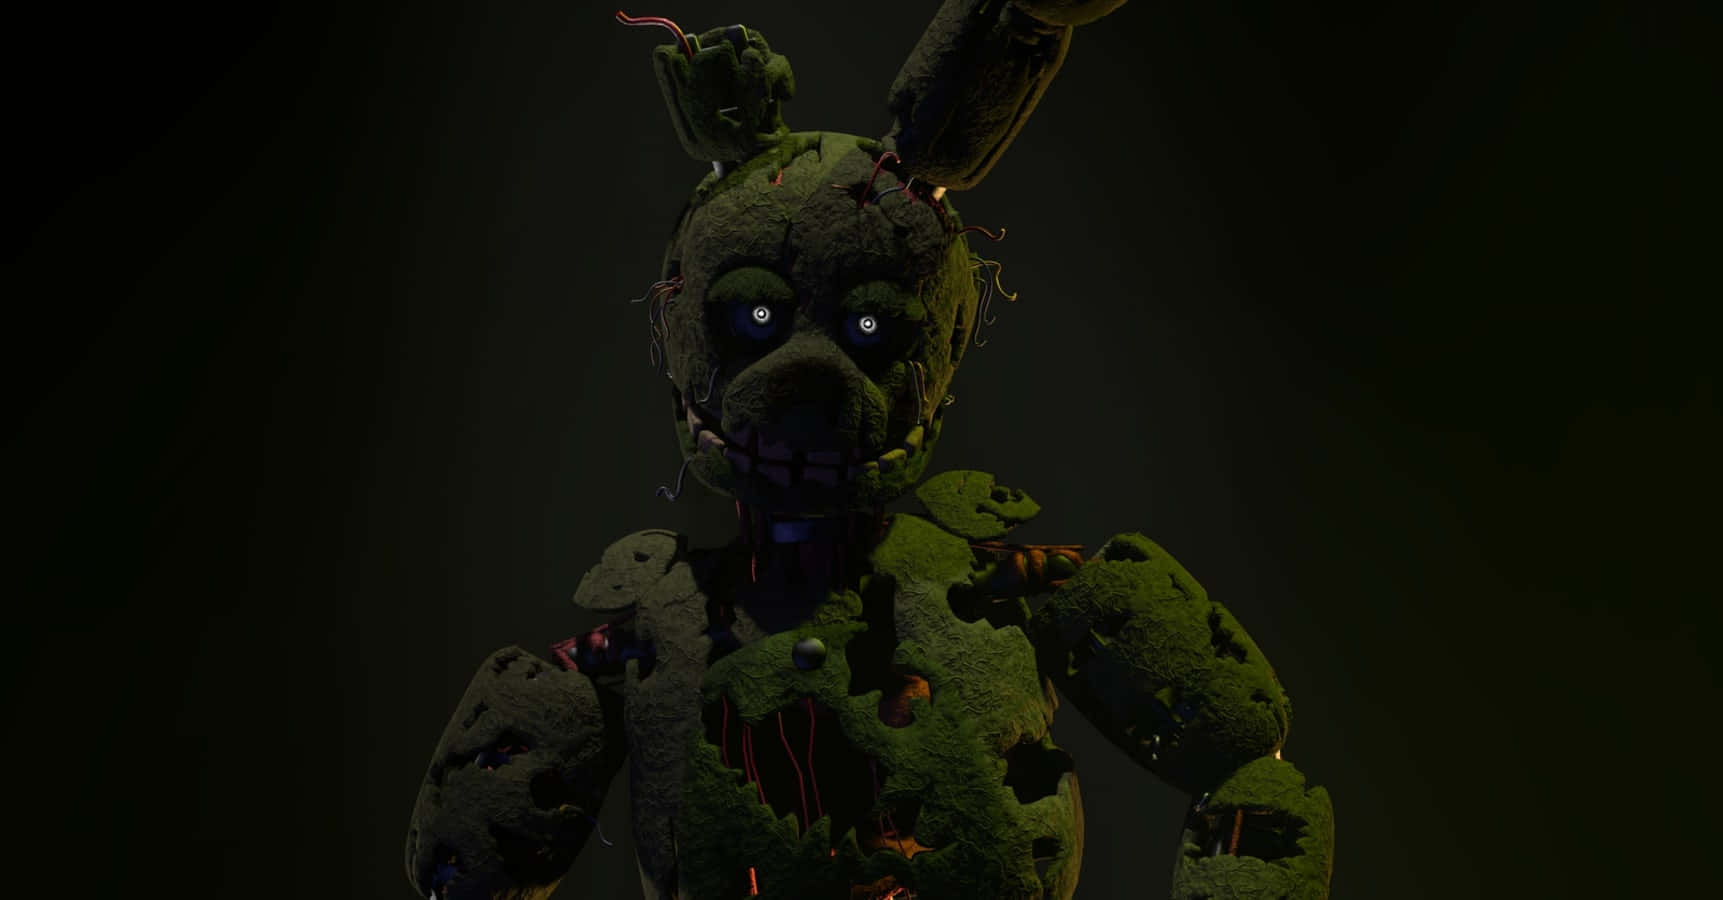 Mysterious and Creepy Springtrap in the Dark Wallpaper